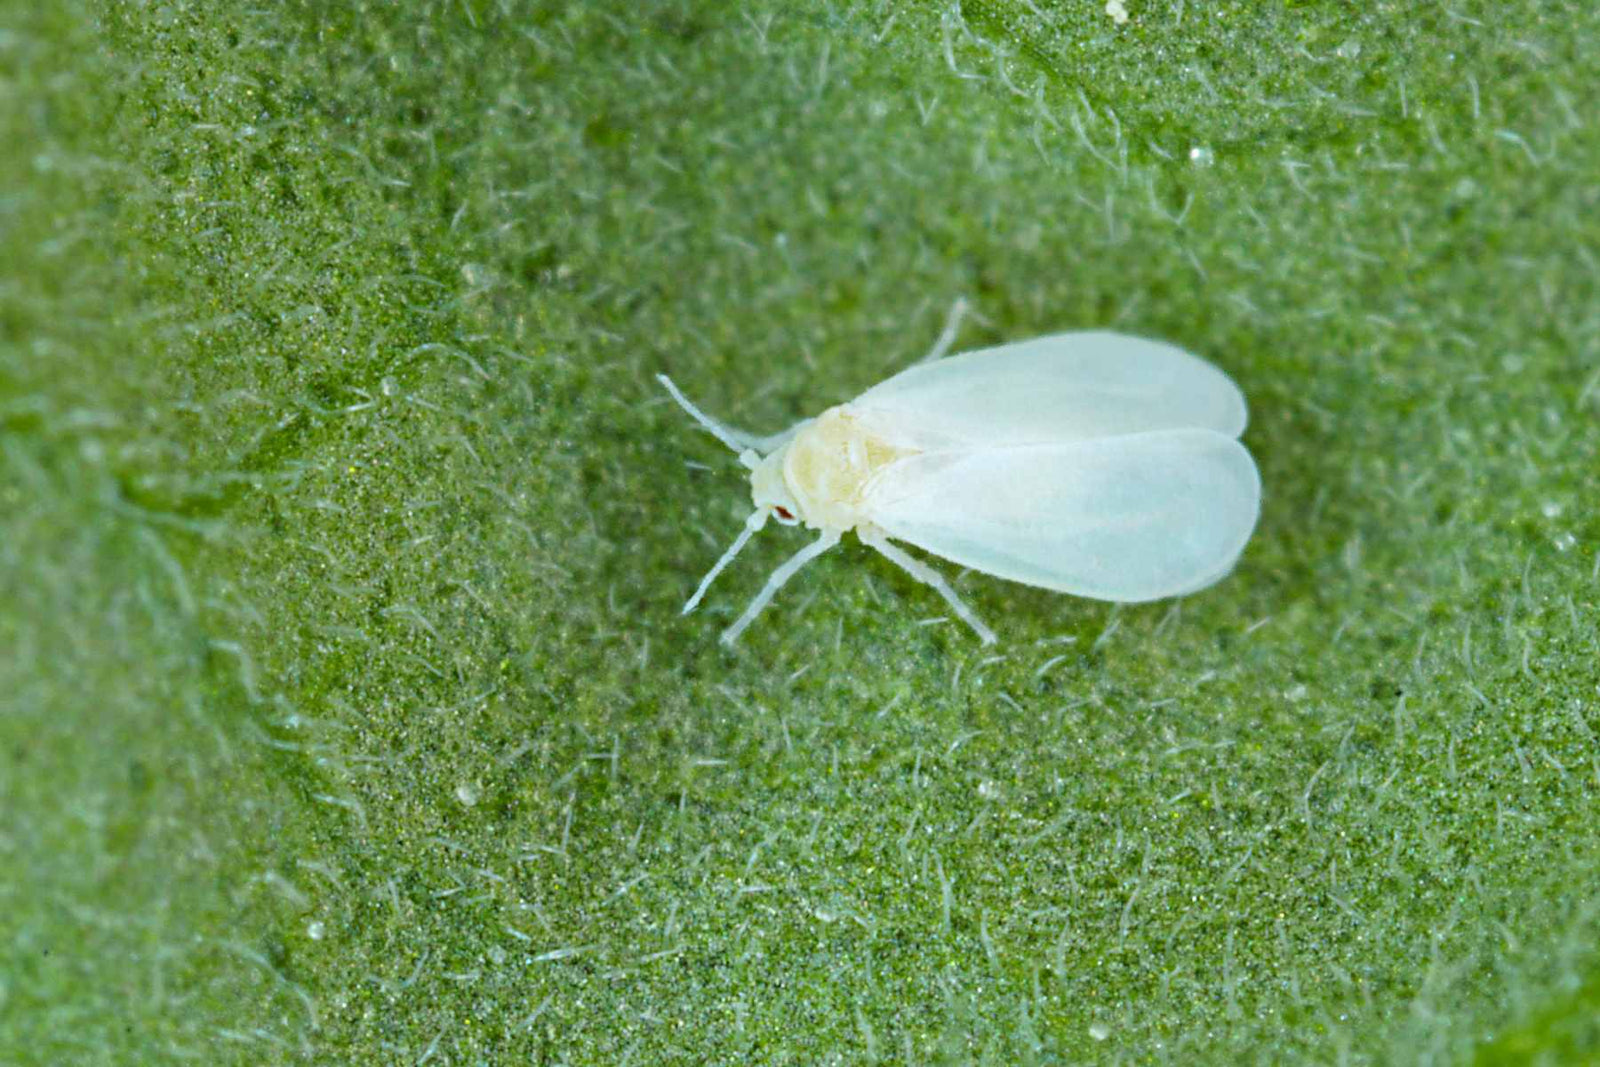 how to get rid of whiteflies on indoor plants